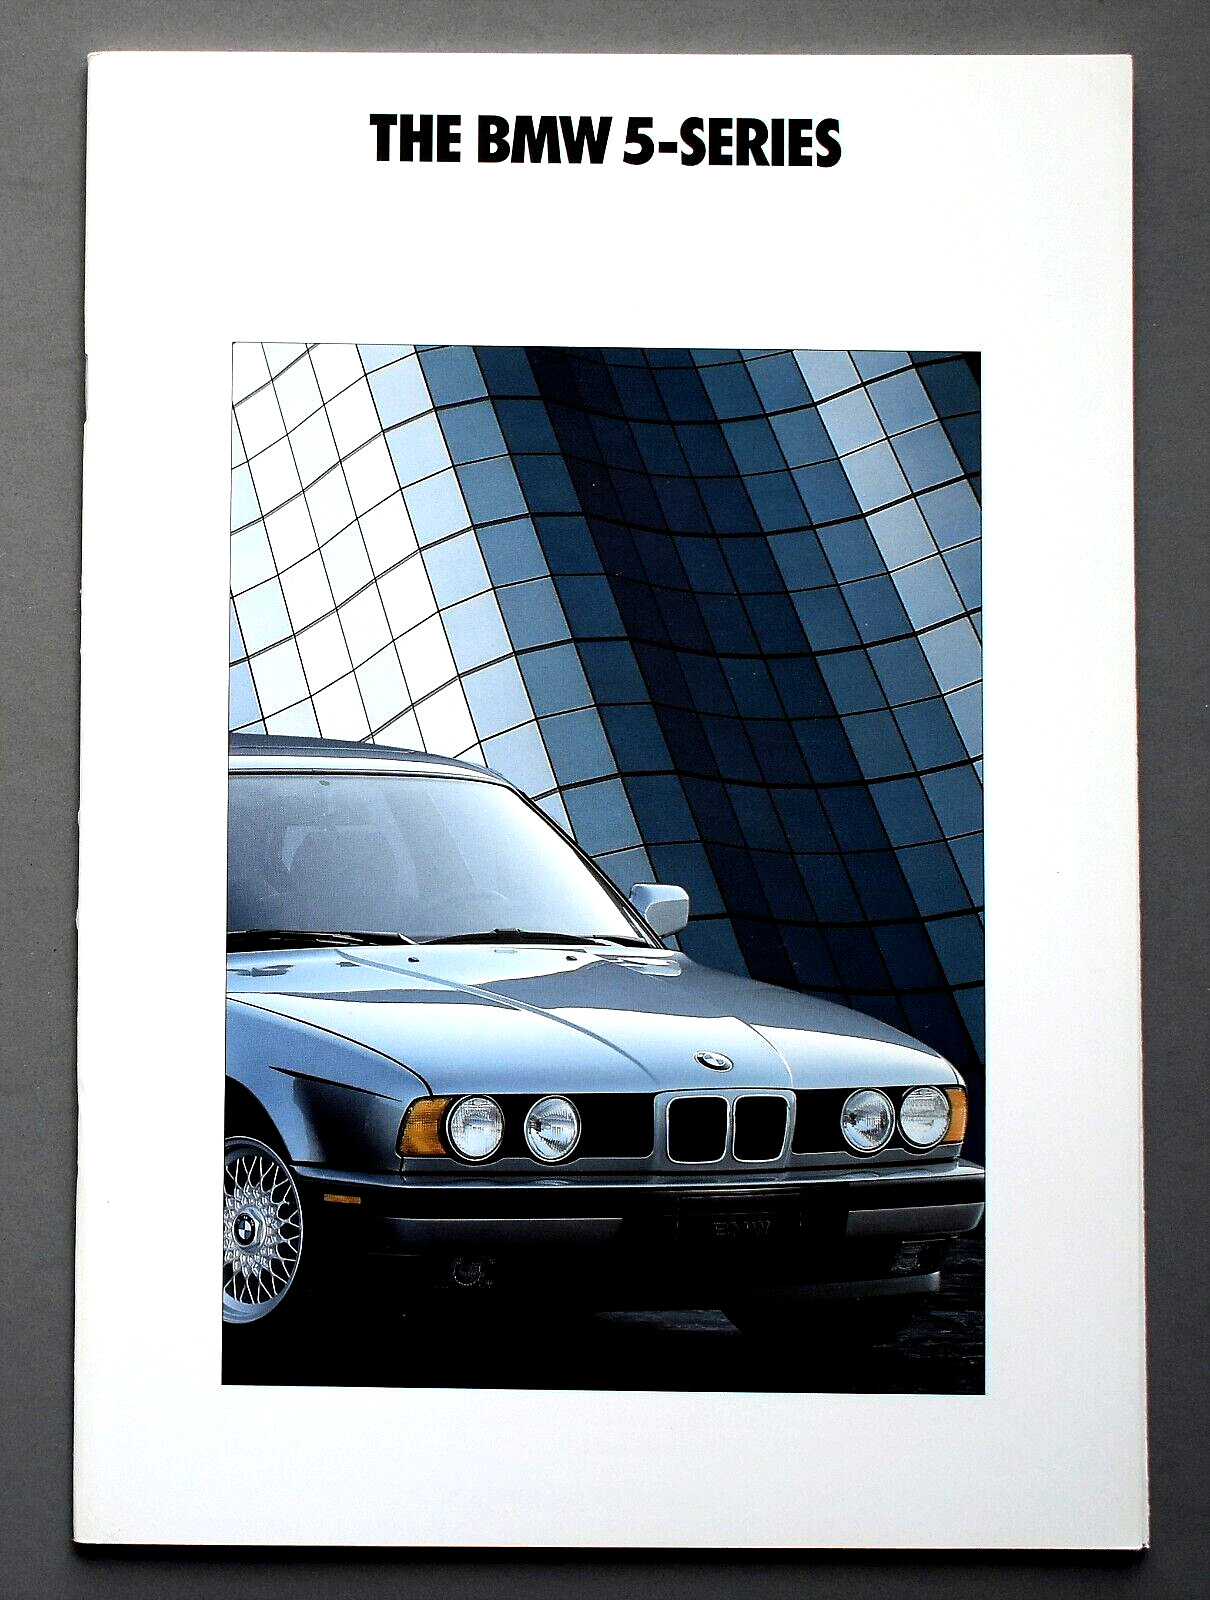 1991 BMW 5 SERIES REVISED 03/1991 SALES BROCHURE CATALOG ~ 44 PAGES